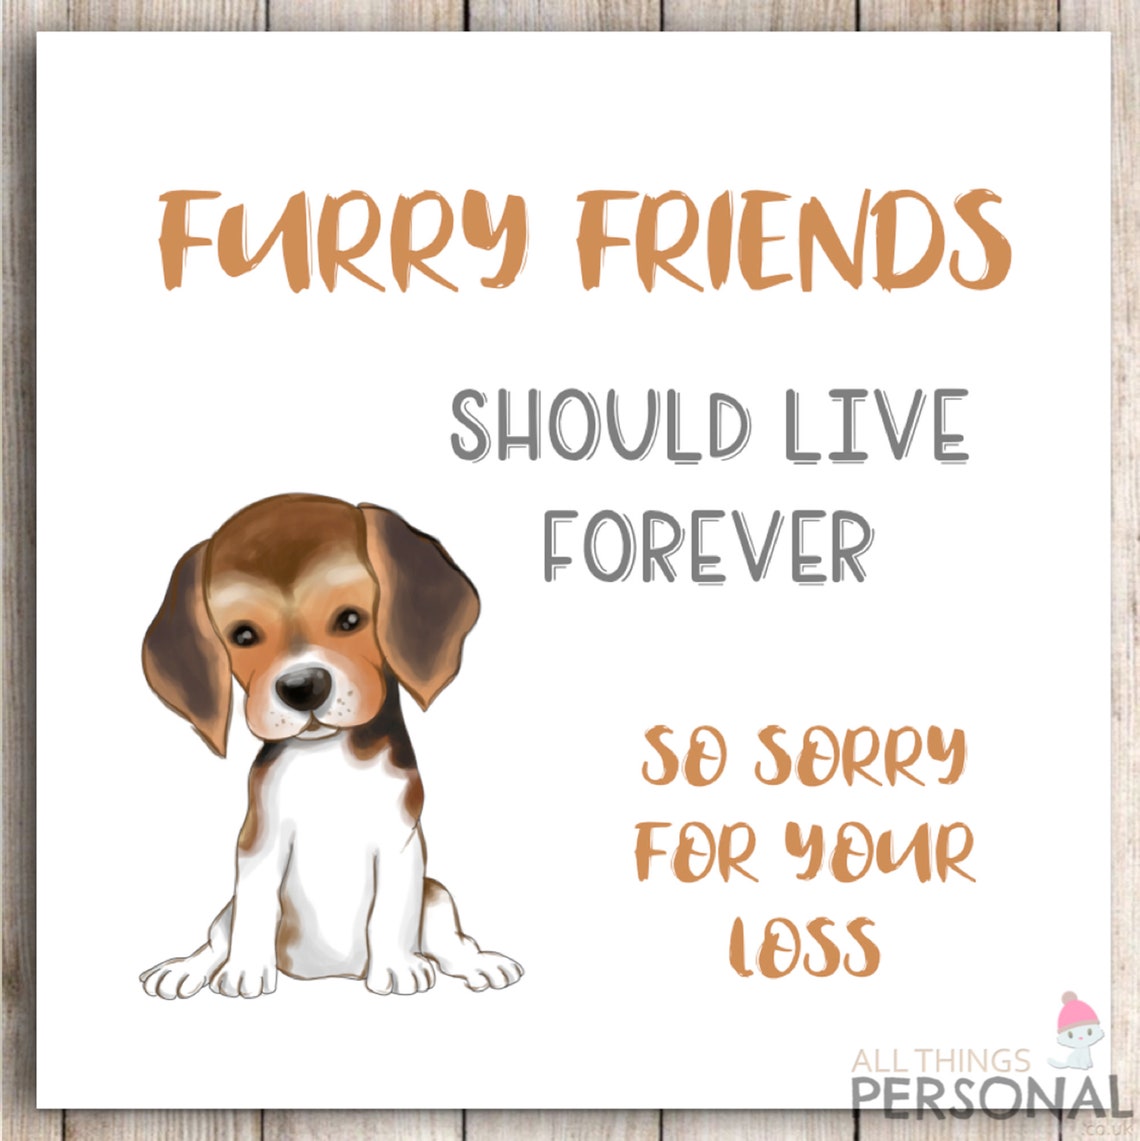 sympathy-card-pet-loss-tomope-zaribanks-co-within-sorry-for-your-loss